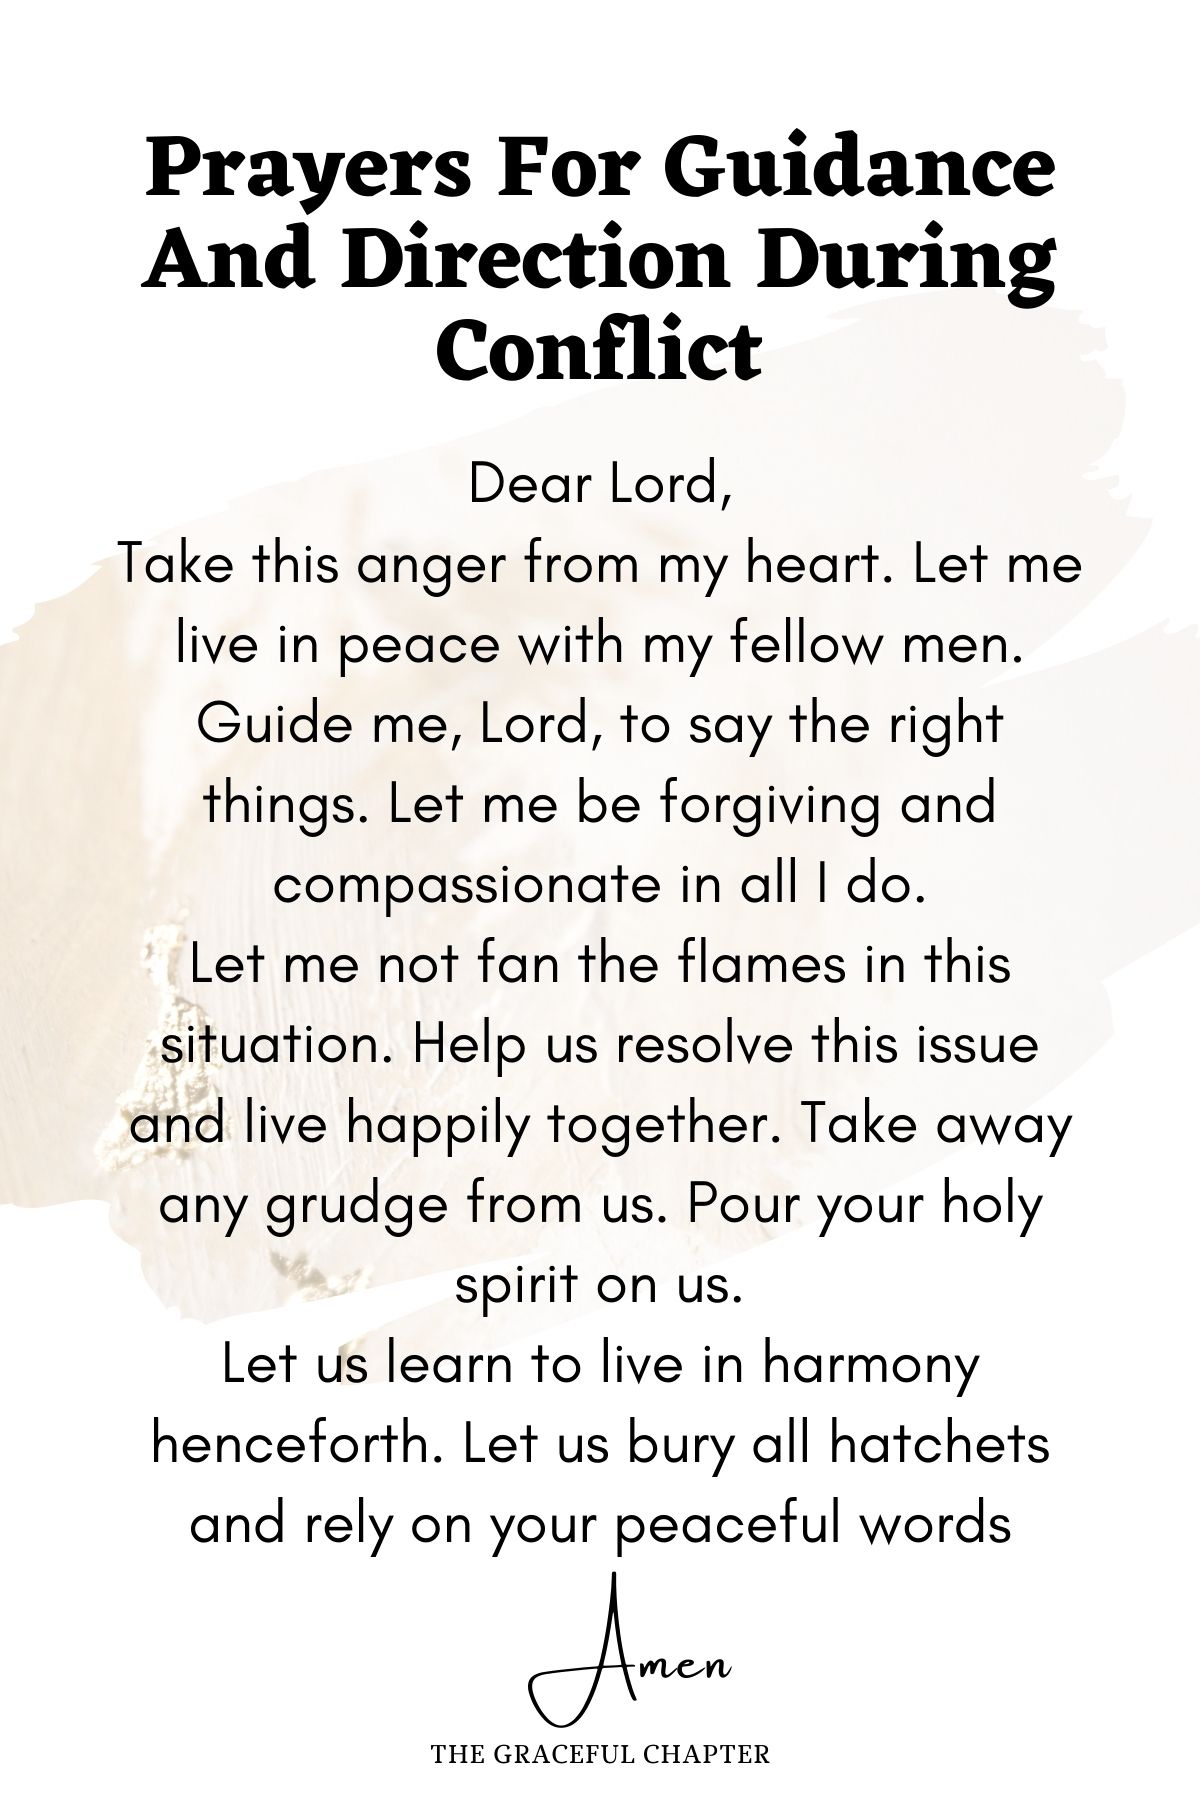 Prayers for guidance and direction during conflict